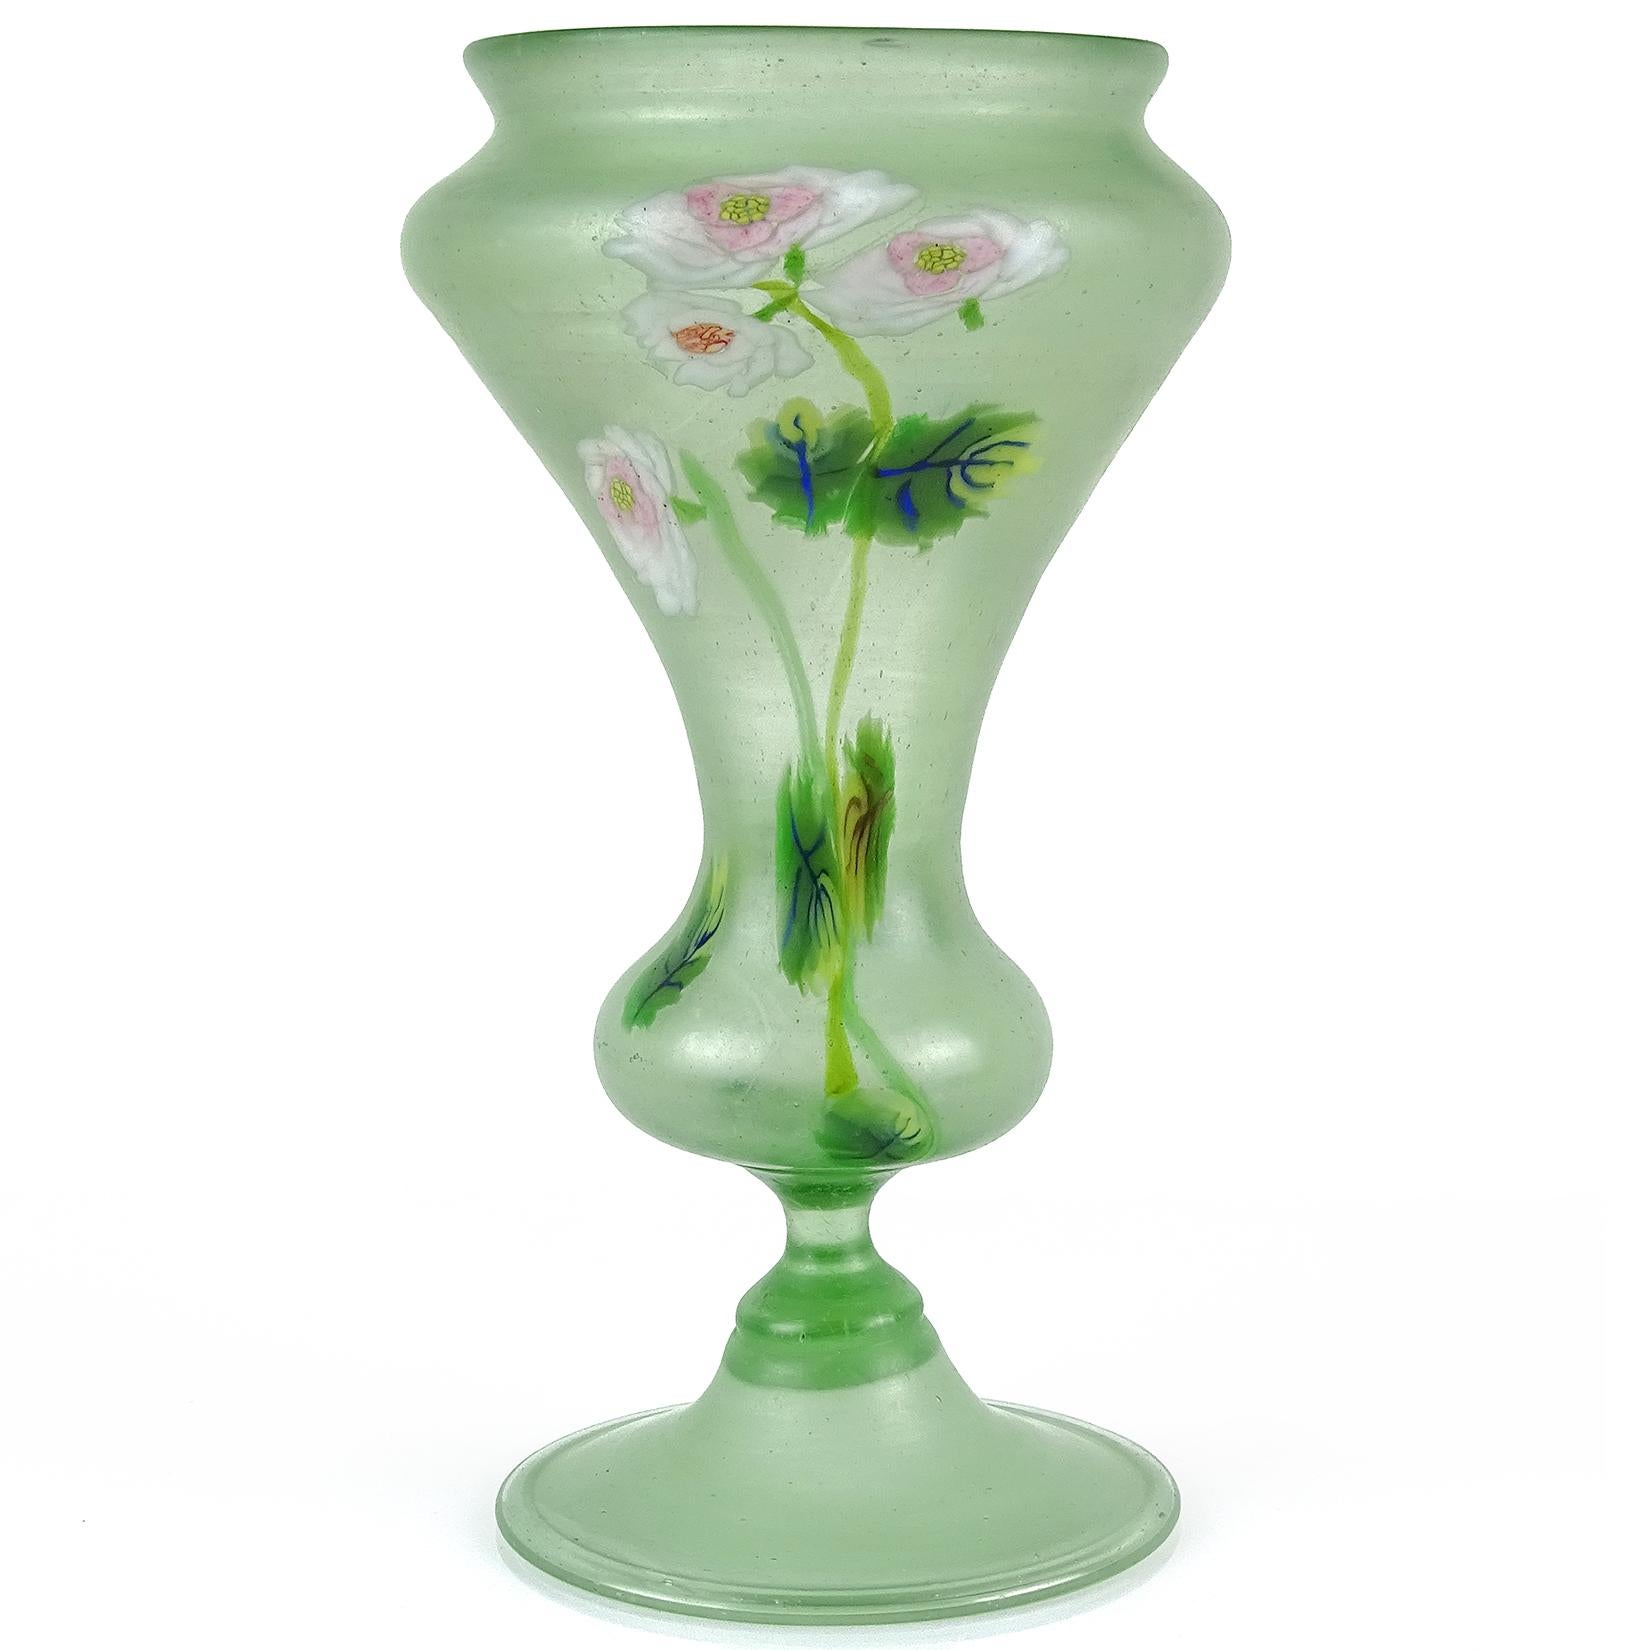 Gorgeous antique Murano hand blown light green Italian satin art glass millefiori flowers art glass decorative vase. Documented to the Fratelli Toso company. It has a unique shape and rare design, with white and pink roses and blue with yellow